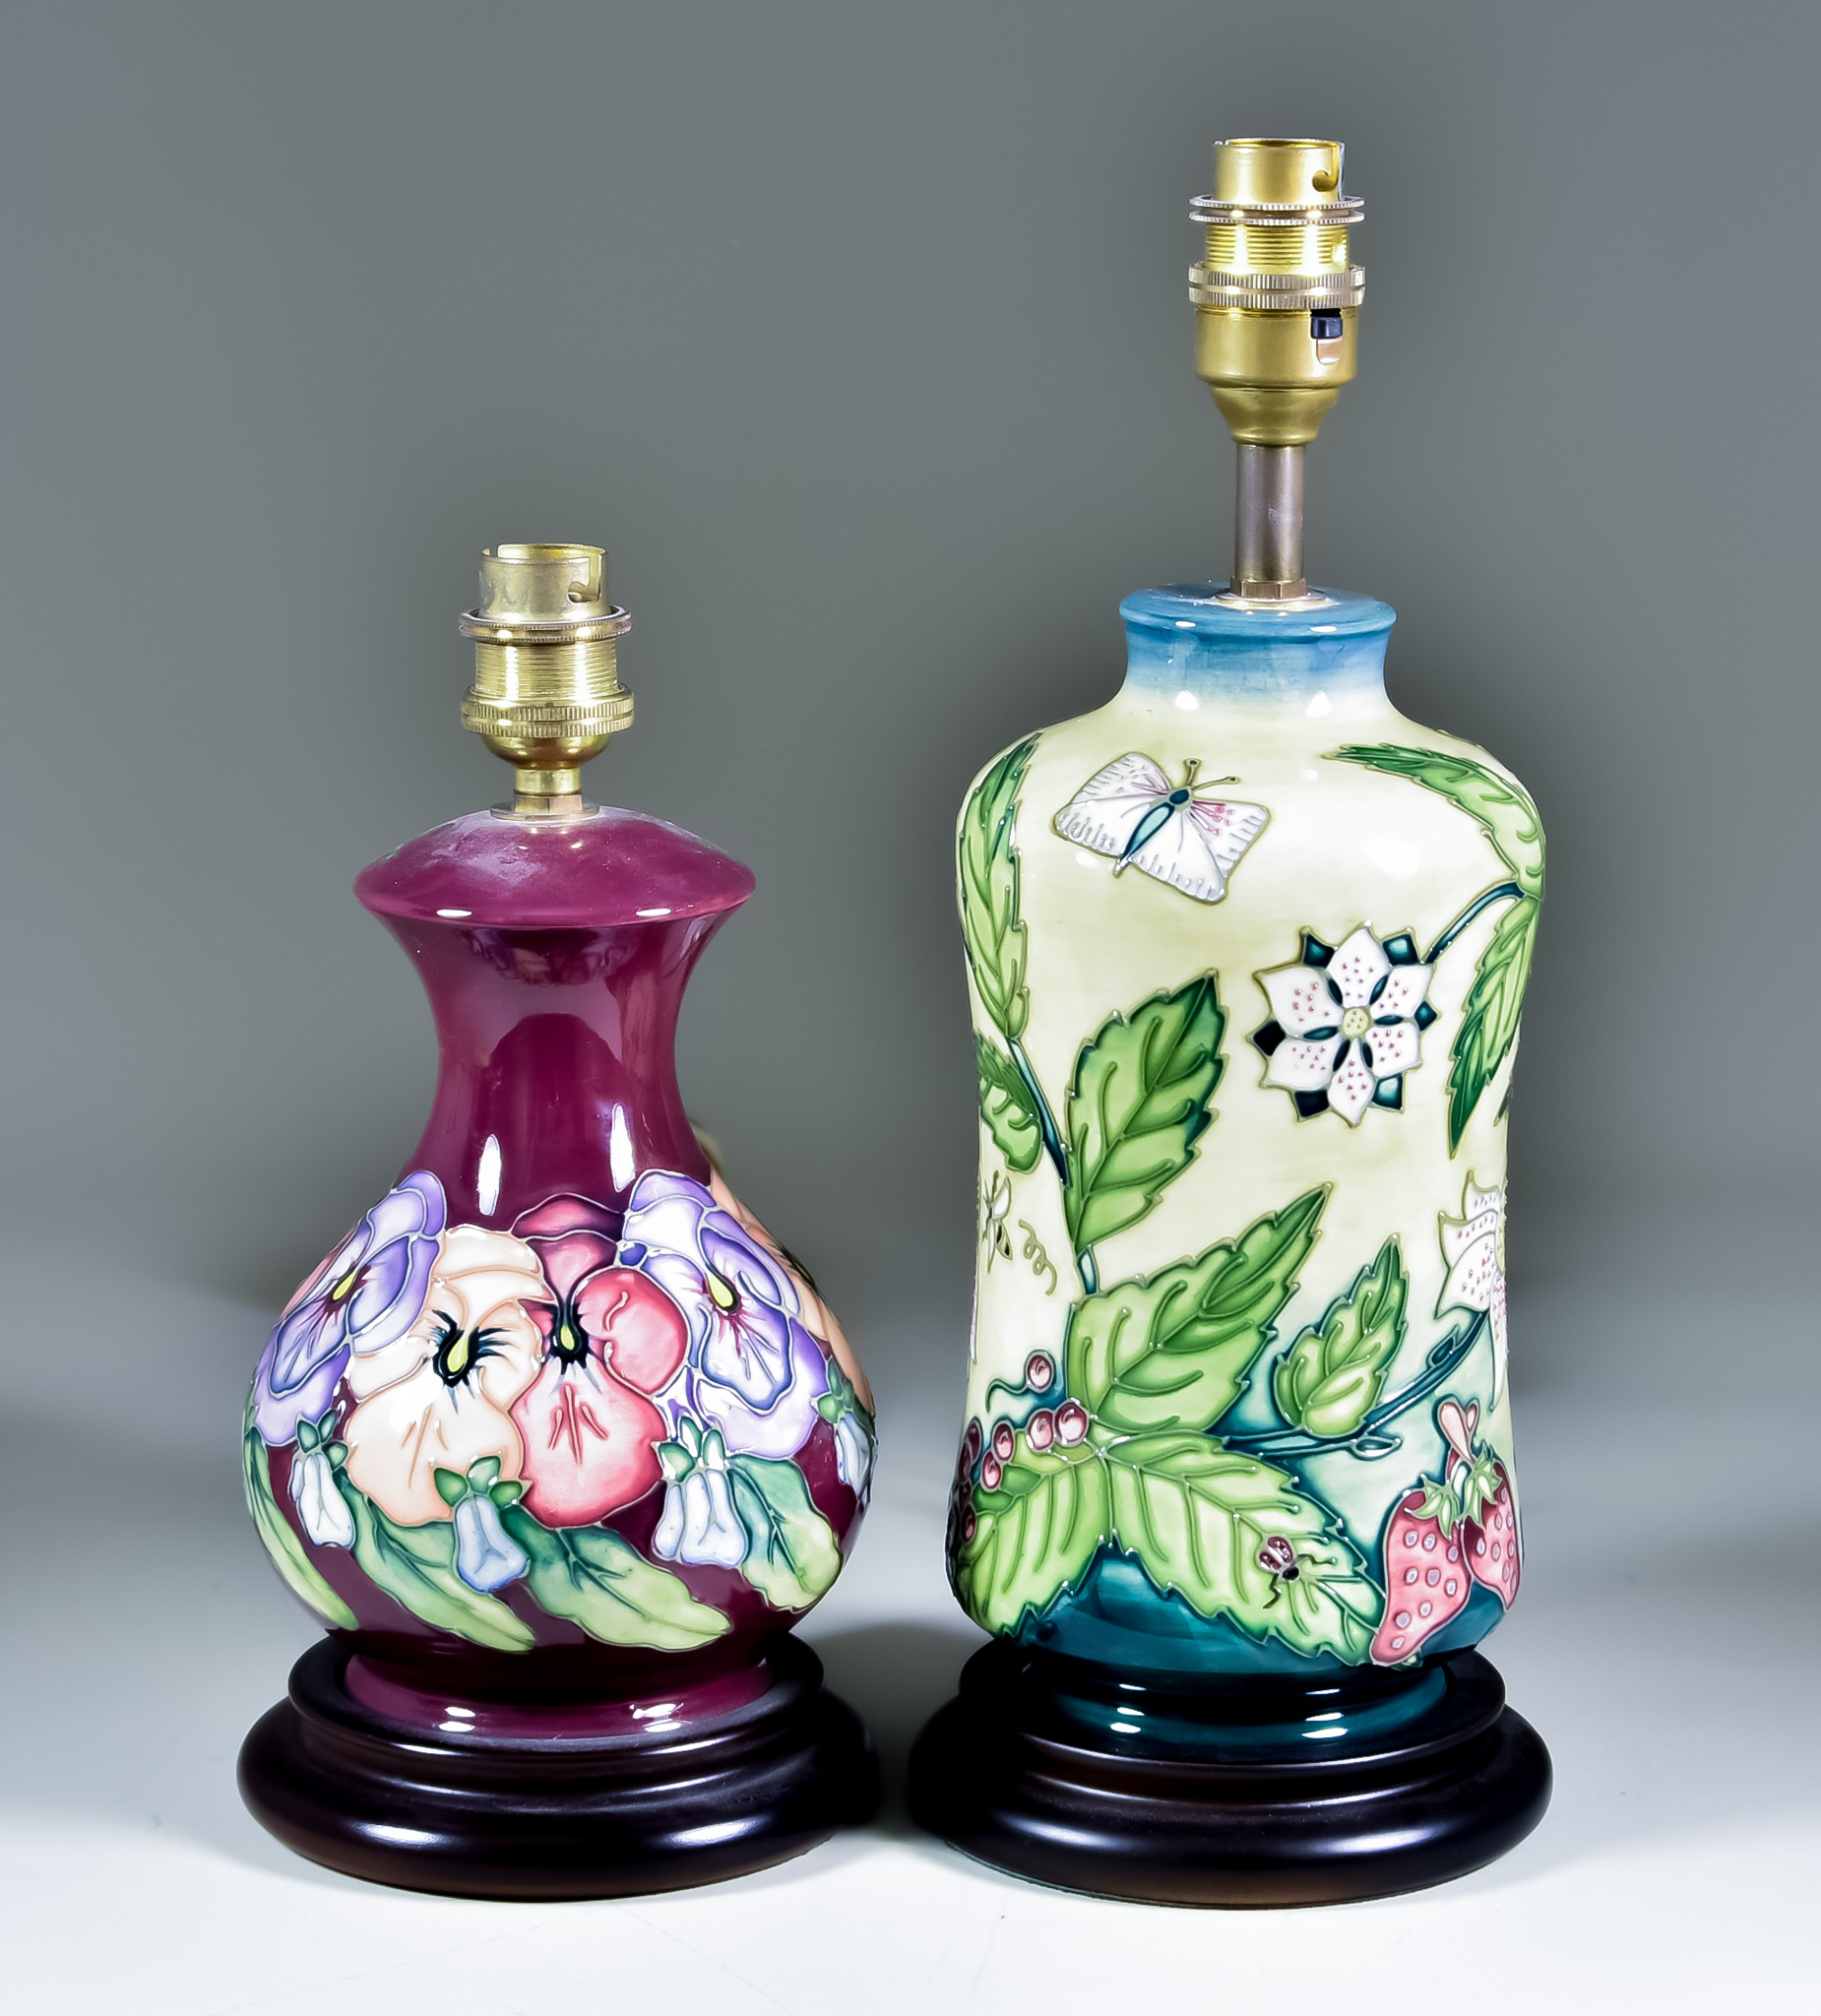 Two Moorcroft Pottery Table Lamps on Wooden Bases, one decorated in Fruit Garden design on a cream